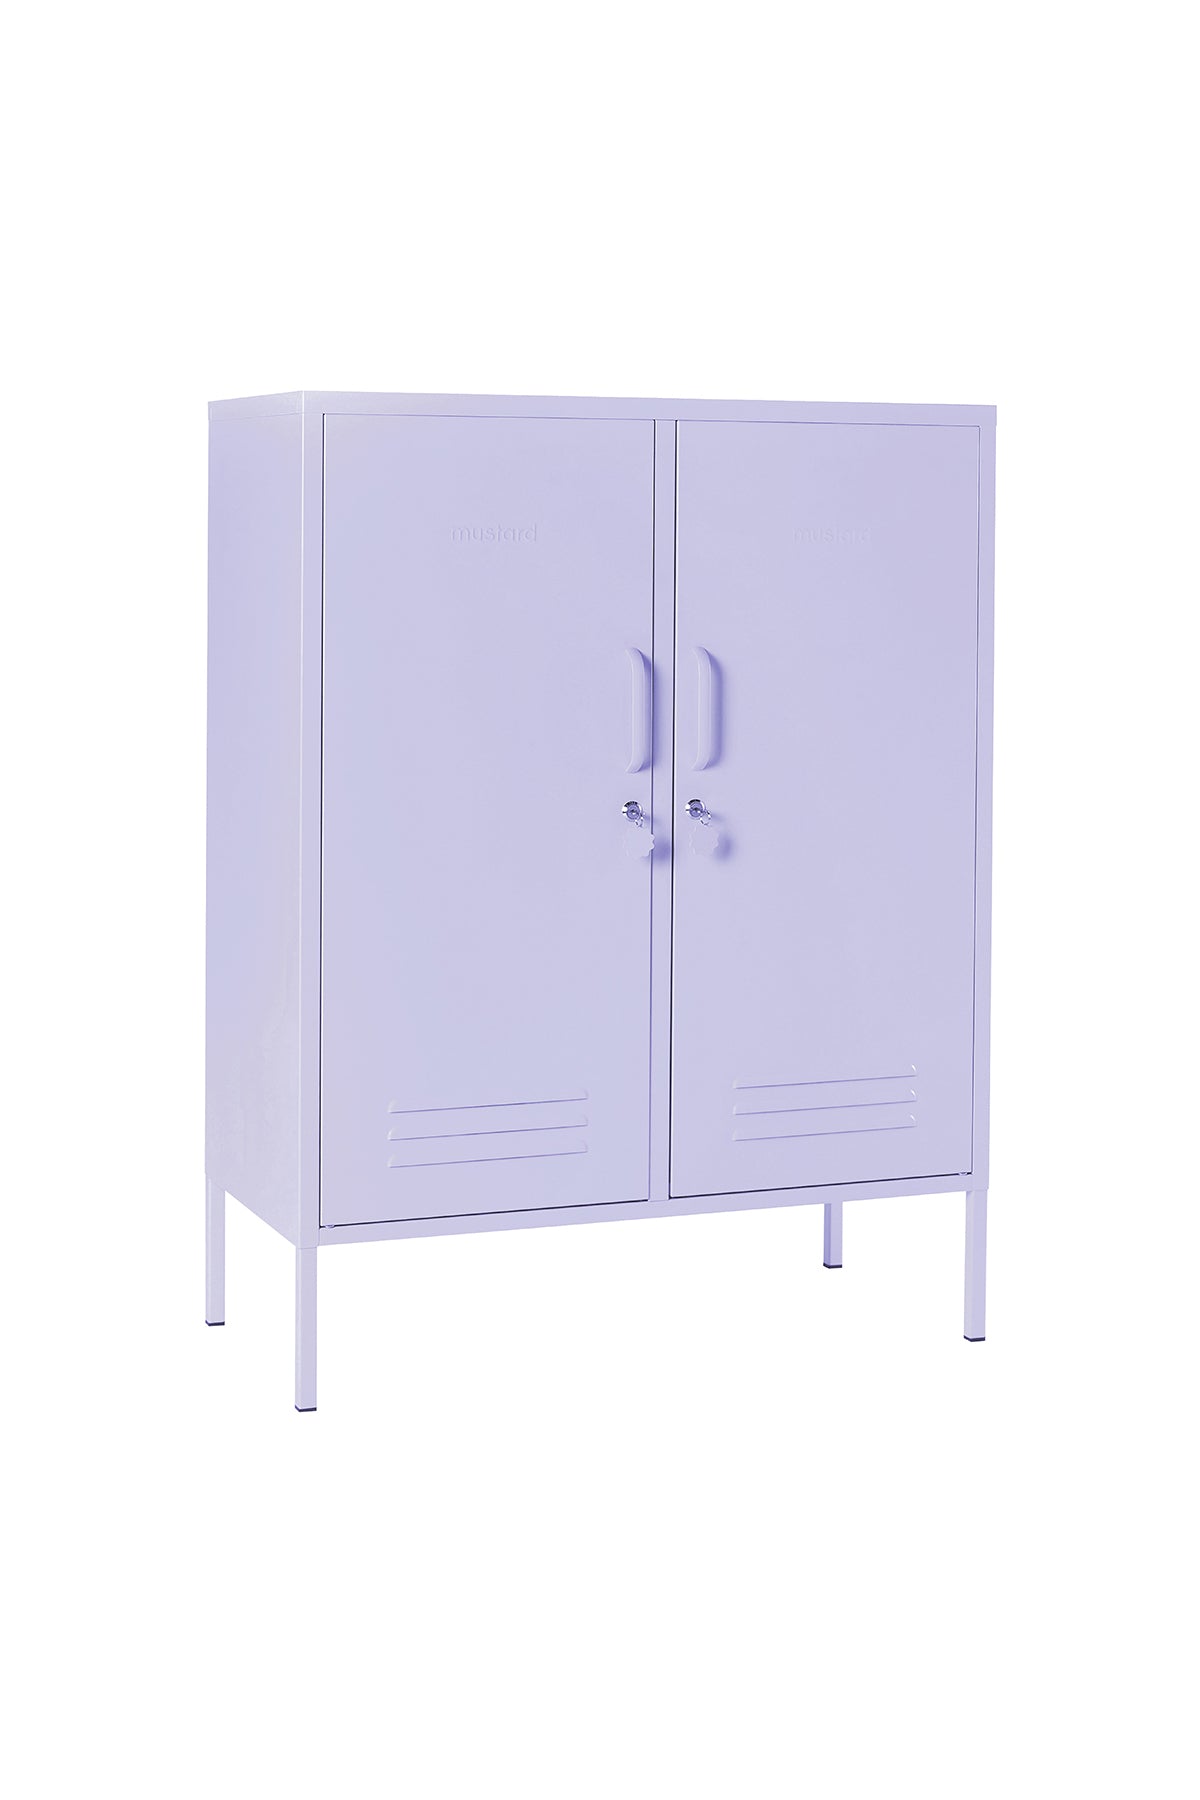 The Midi Locker in Lilac By Mustard Made